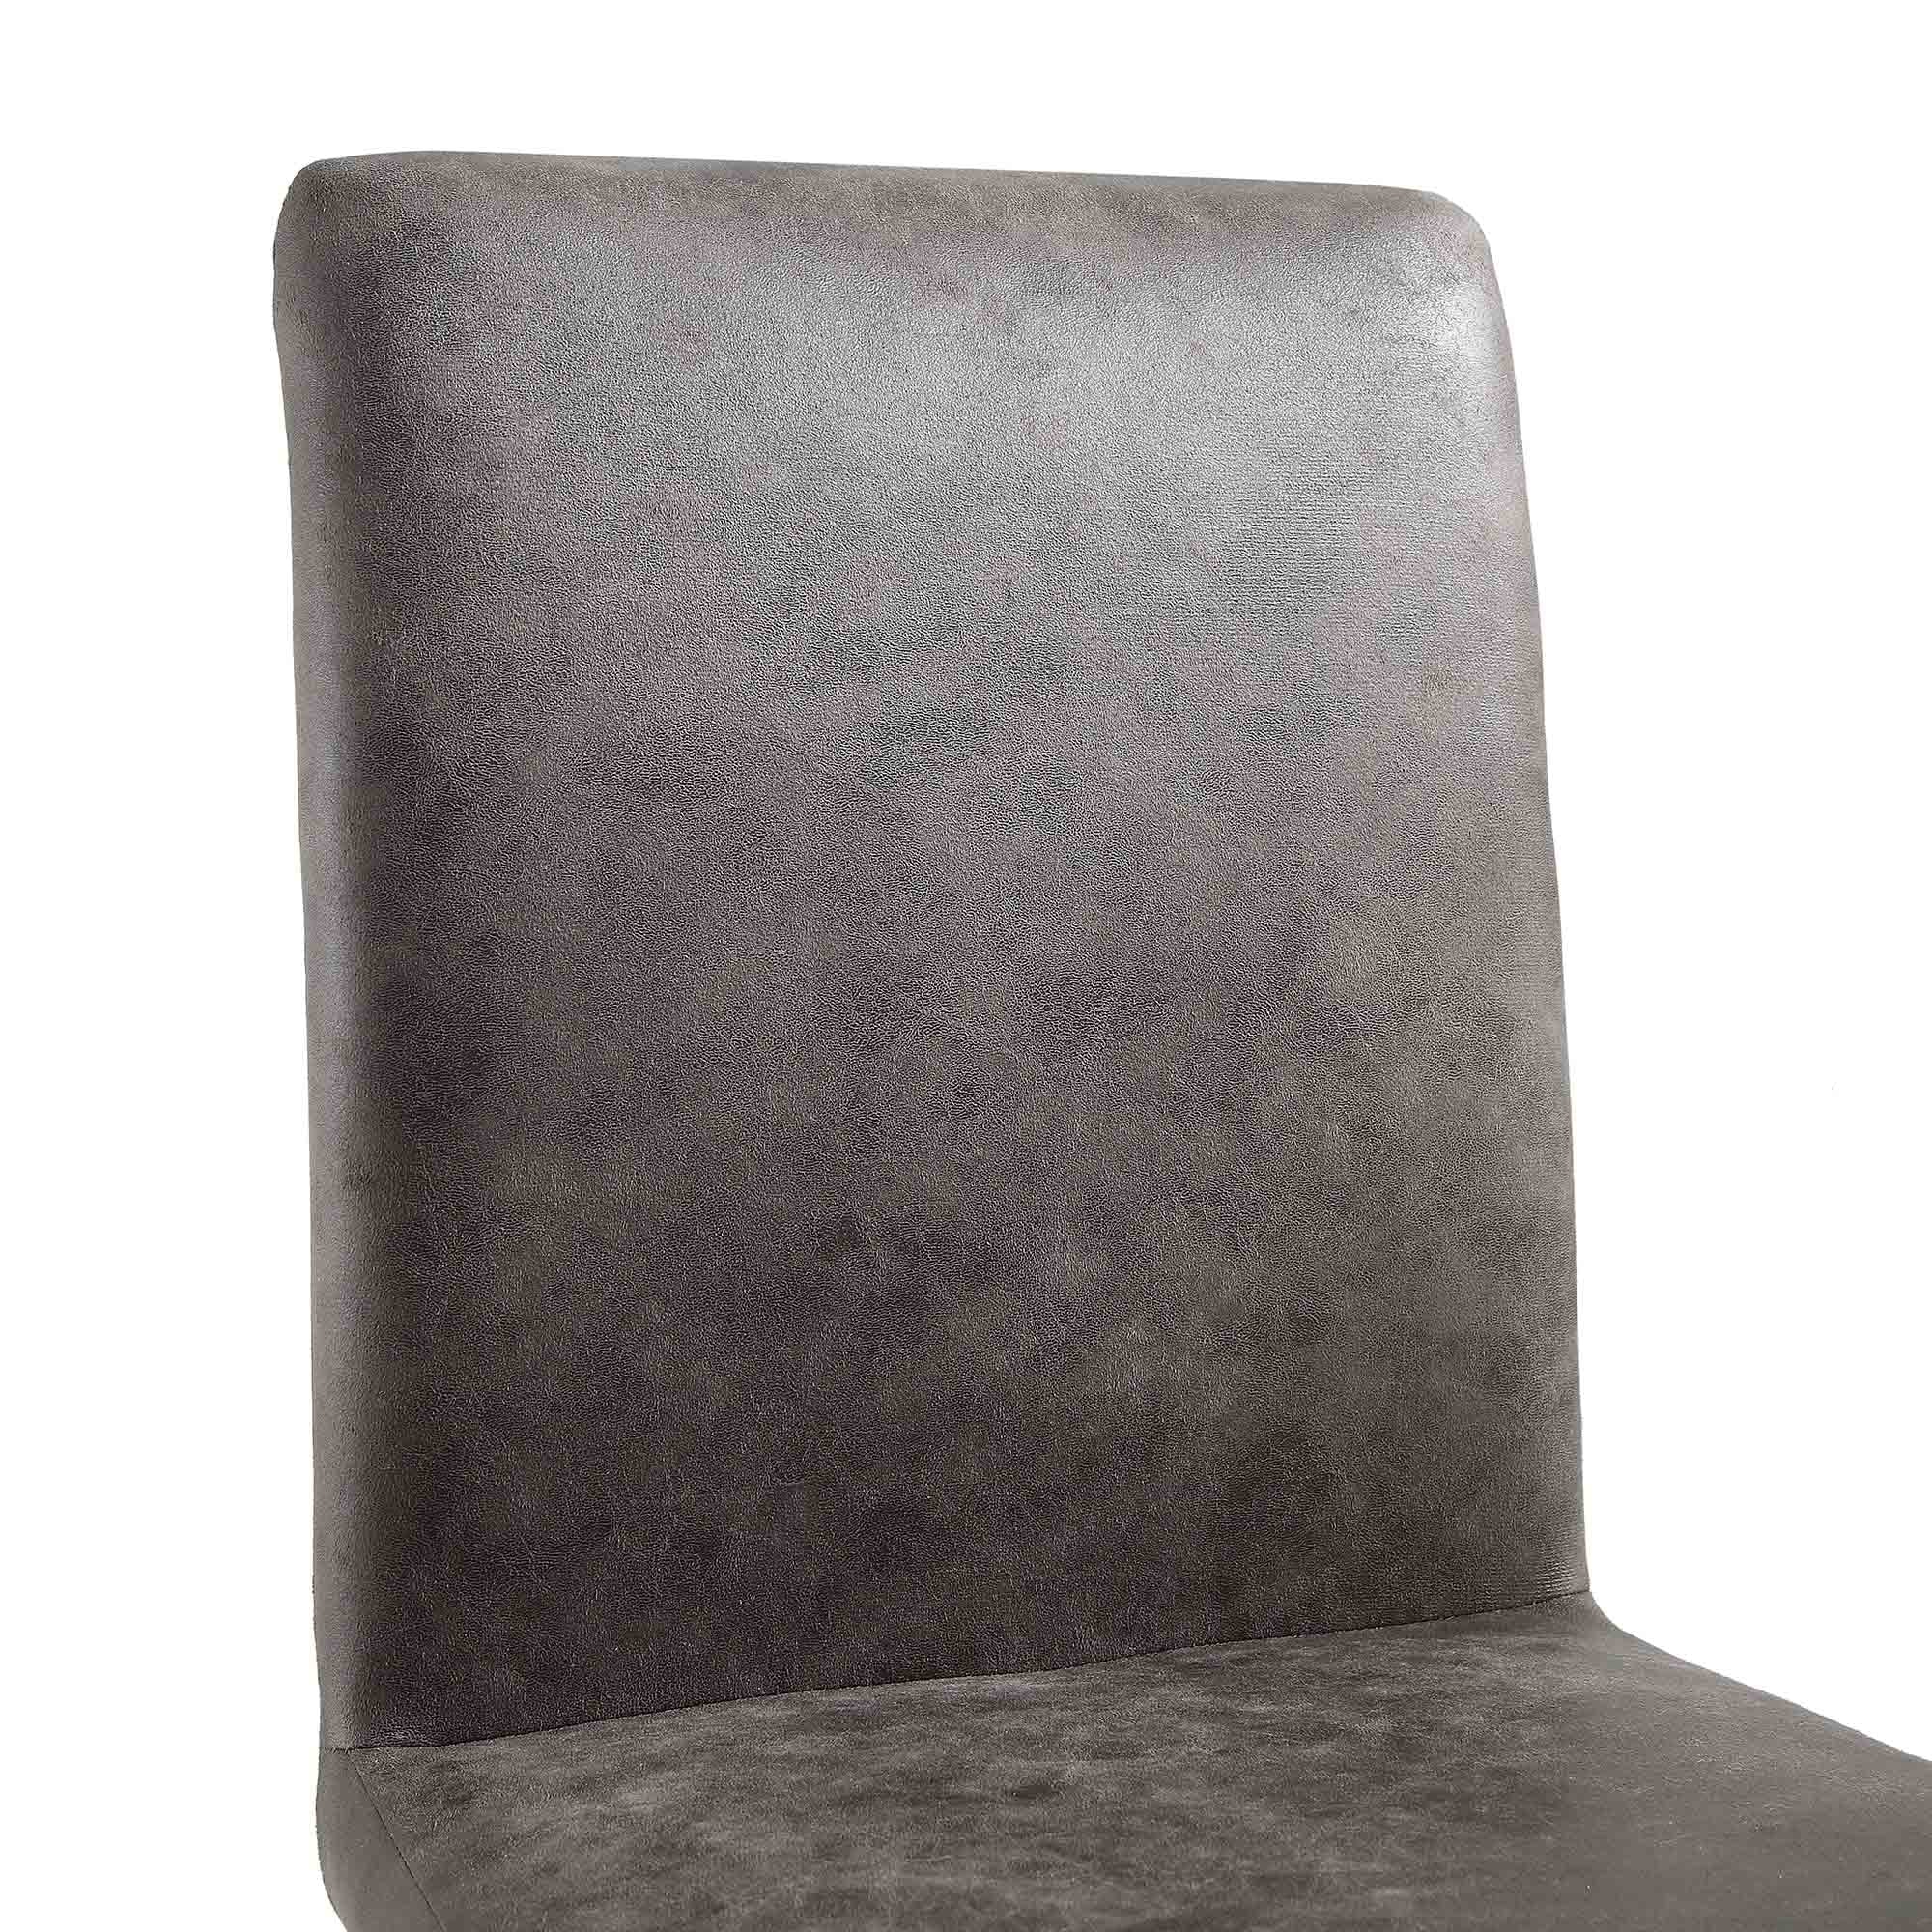 Fernie Set of 2 Steel Grey Vegan Leather Dining Chairs with Upholstered Legs